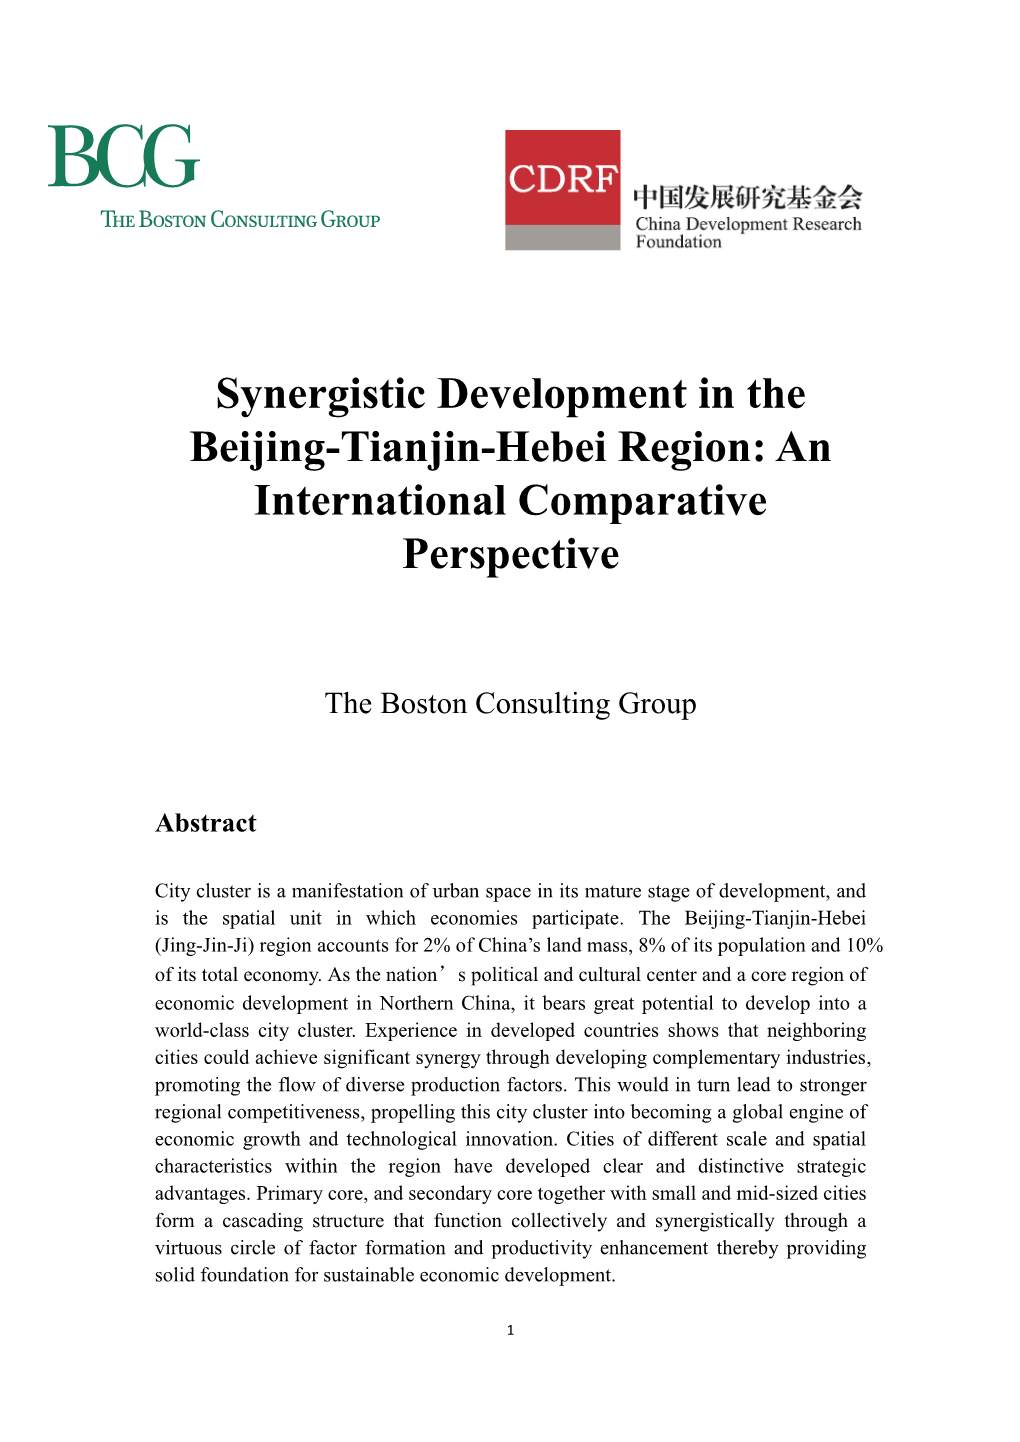 Synergistic Development in the Beijing-Tianjin-Hebei Region: an International Comparative Perspective